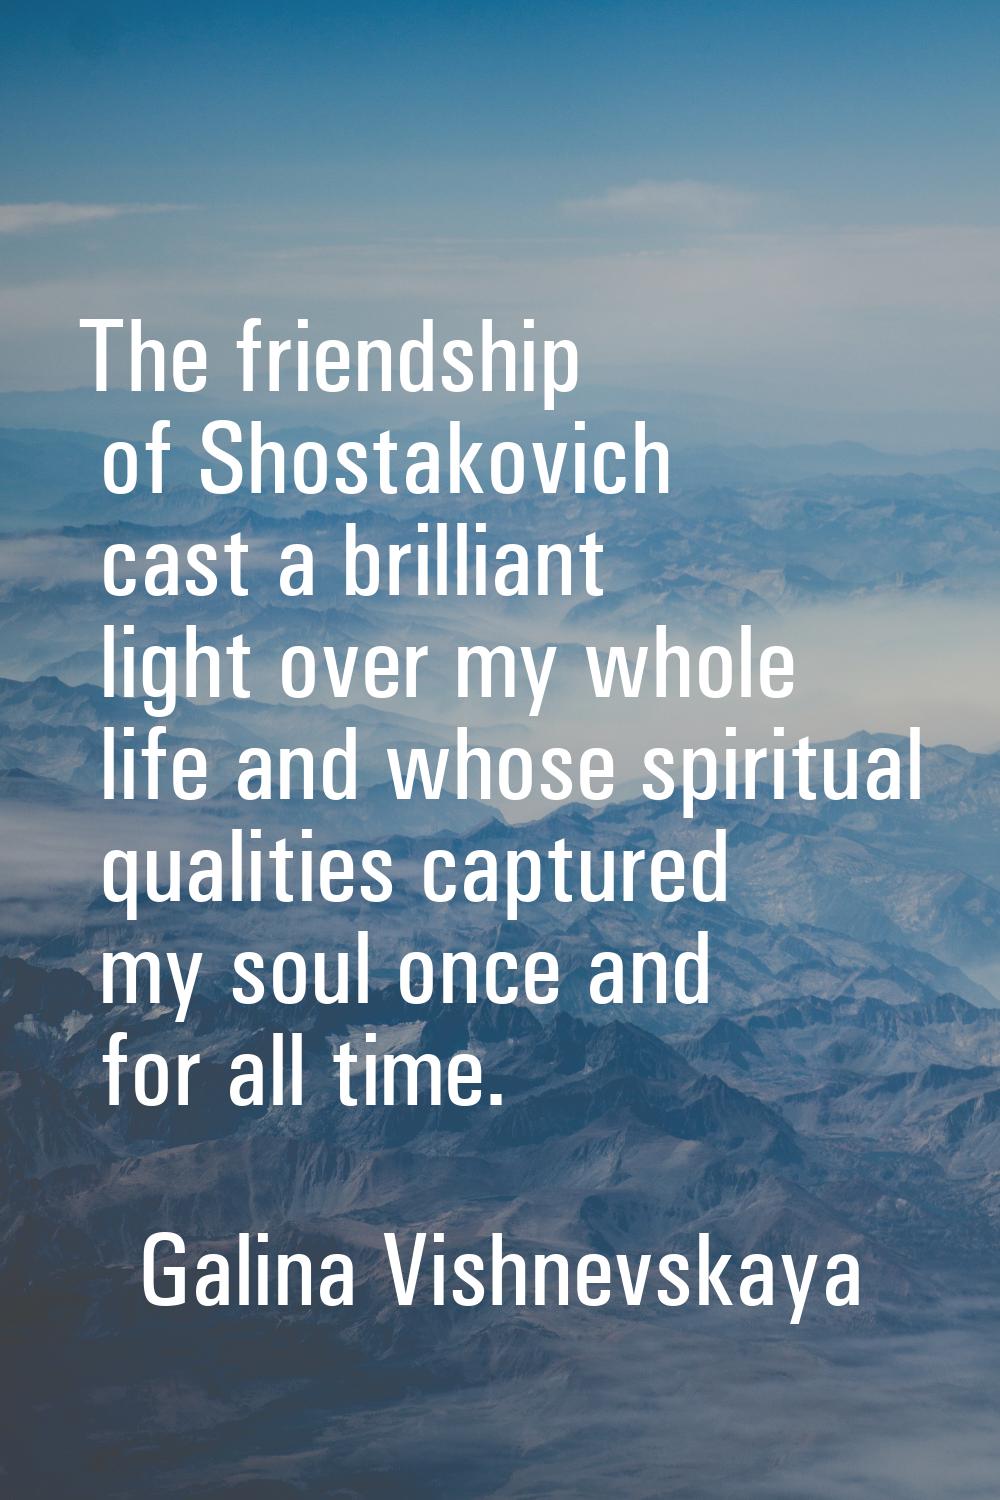 The friendship of Shostakovich cast a brilliant light over my whole life and whose spiritual qualit